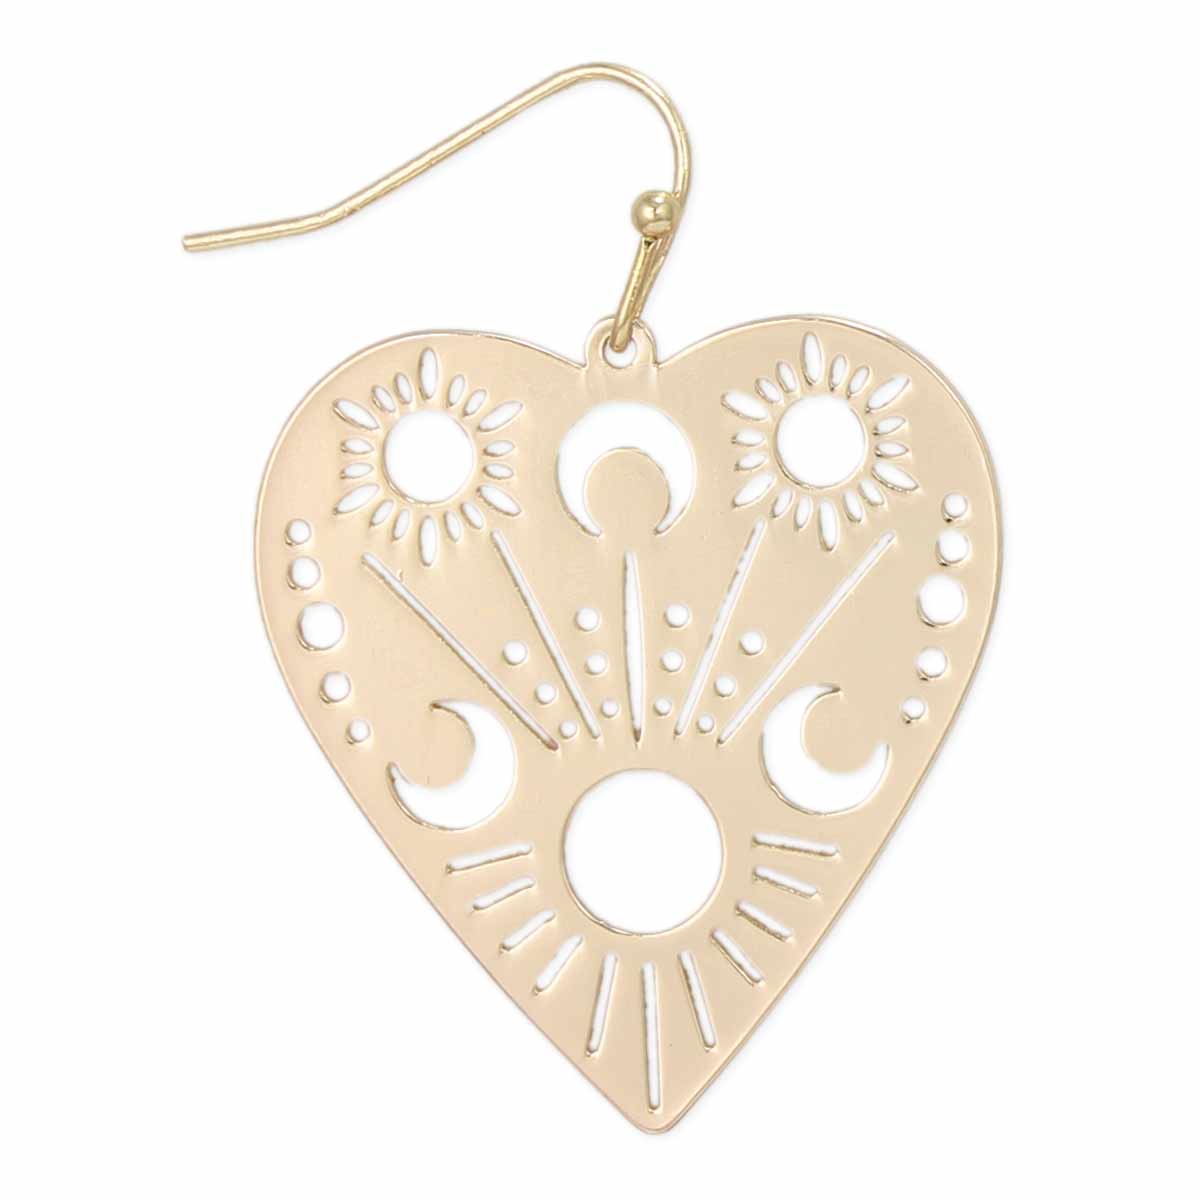 Read the Signs Gold Celestial Planchette Earrings - Spiral Circle